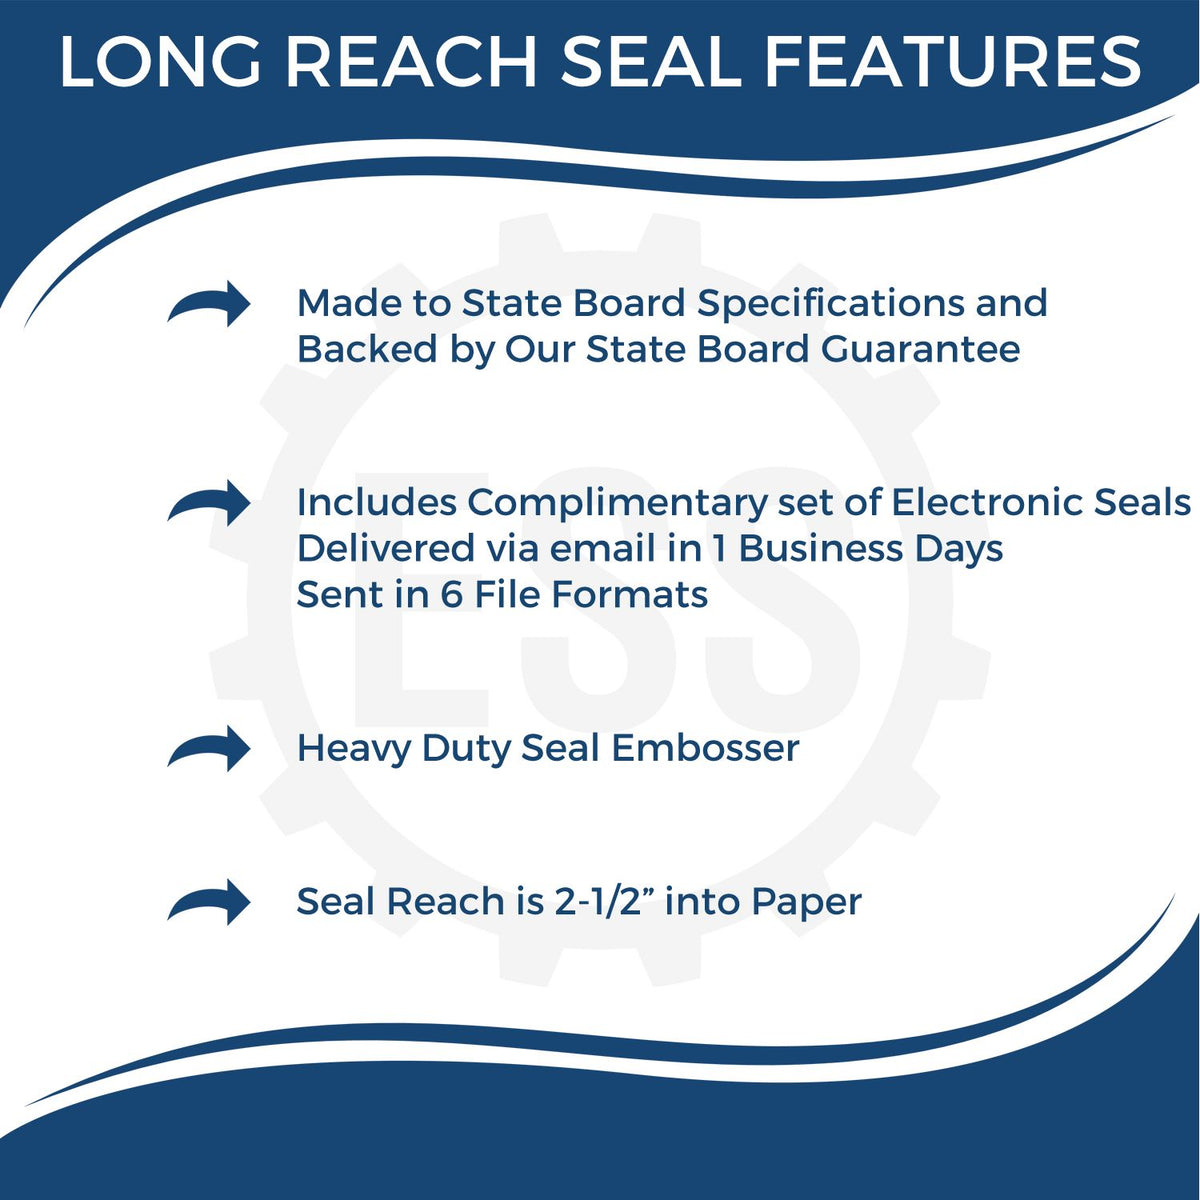 A picture of an infographic highlighting the selling points for the Long Reach Idaho Land Surveyor Seal